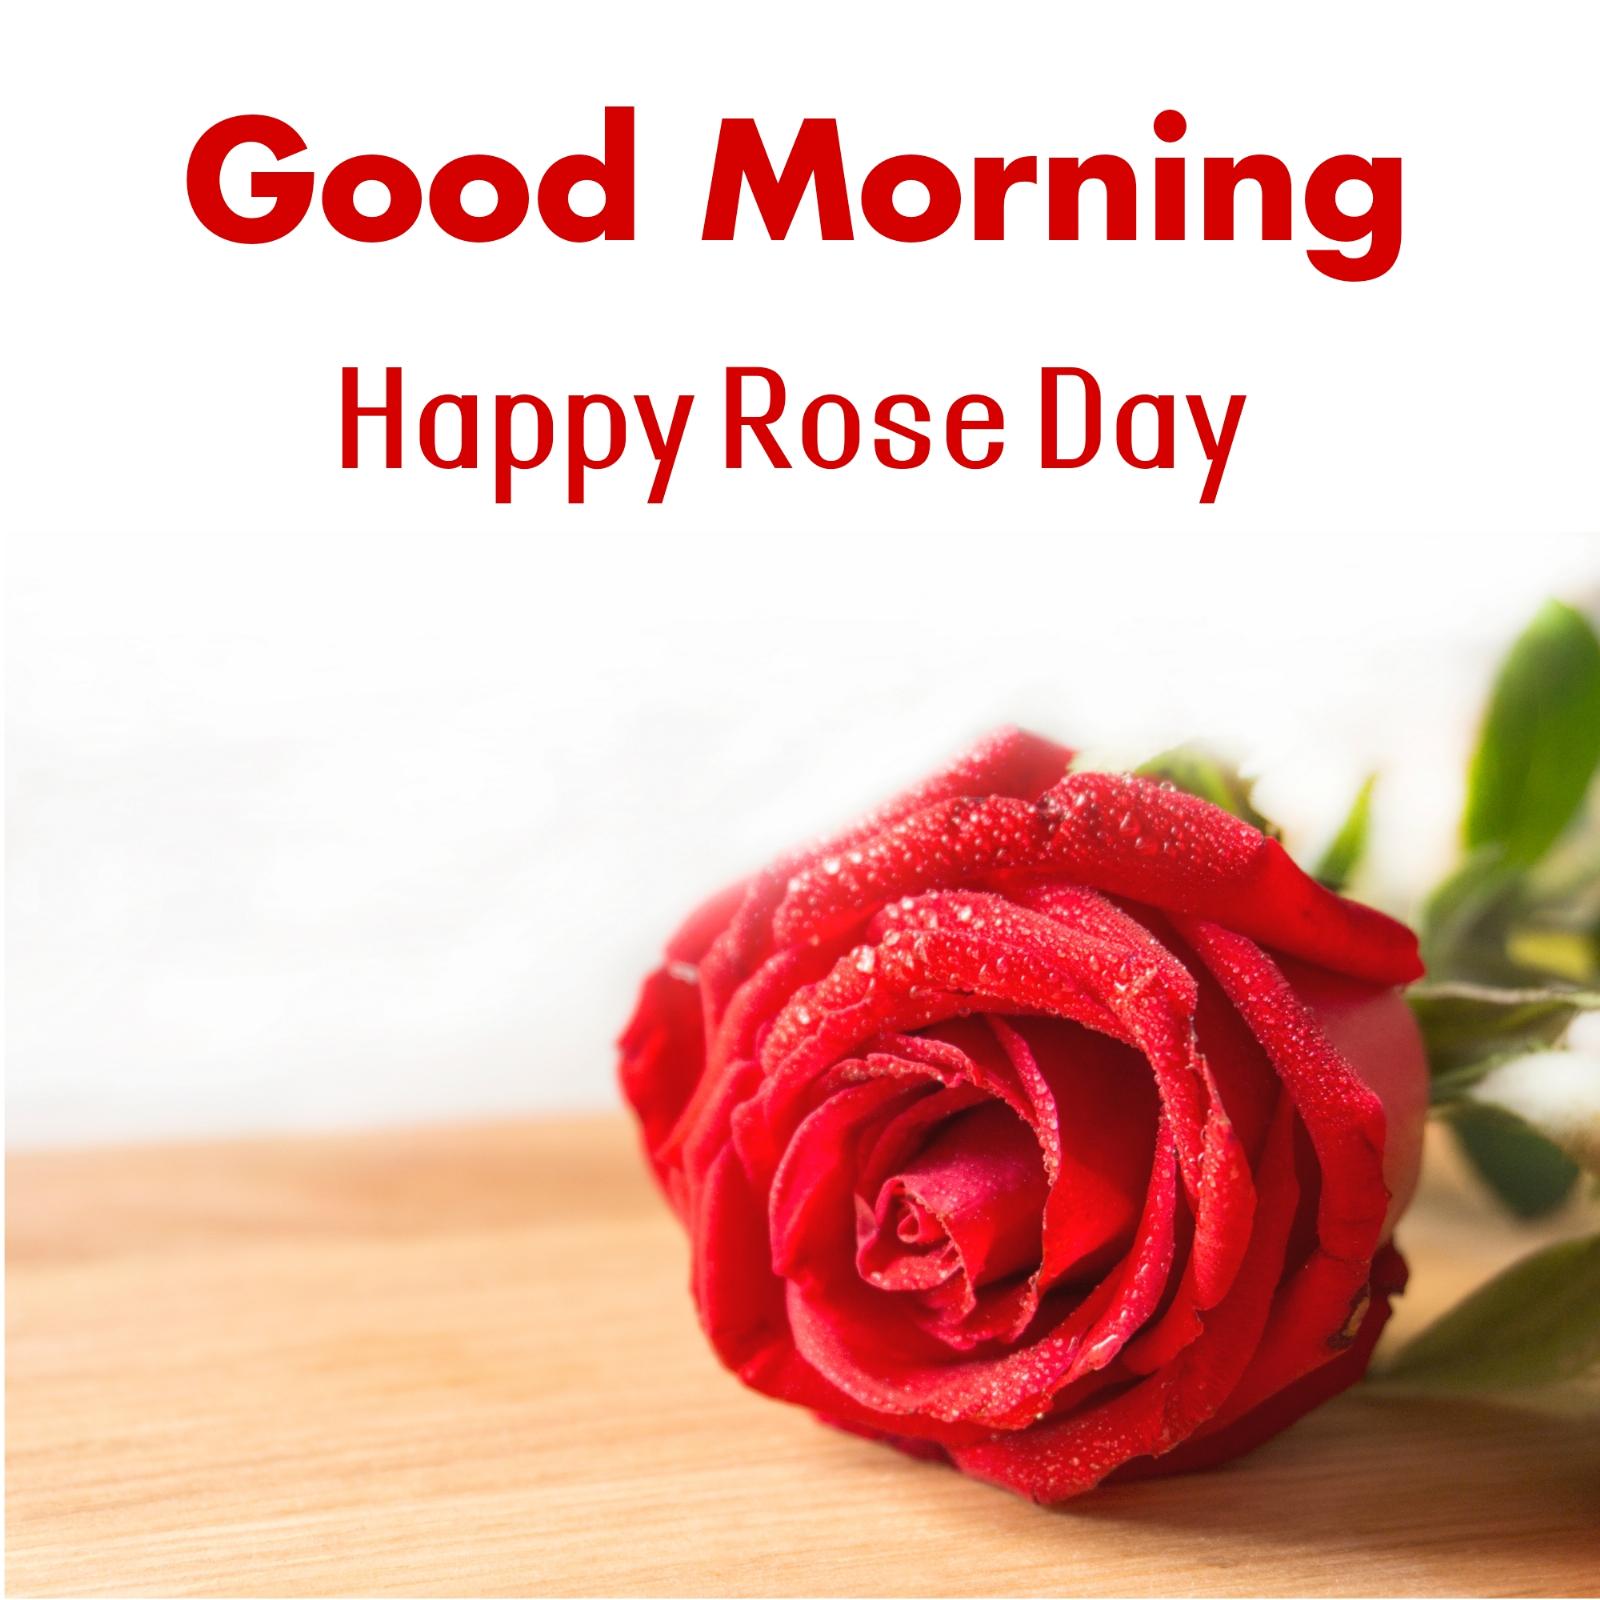 Good Morning Happy Rose Day Images